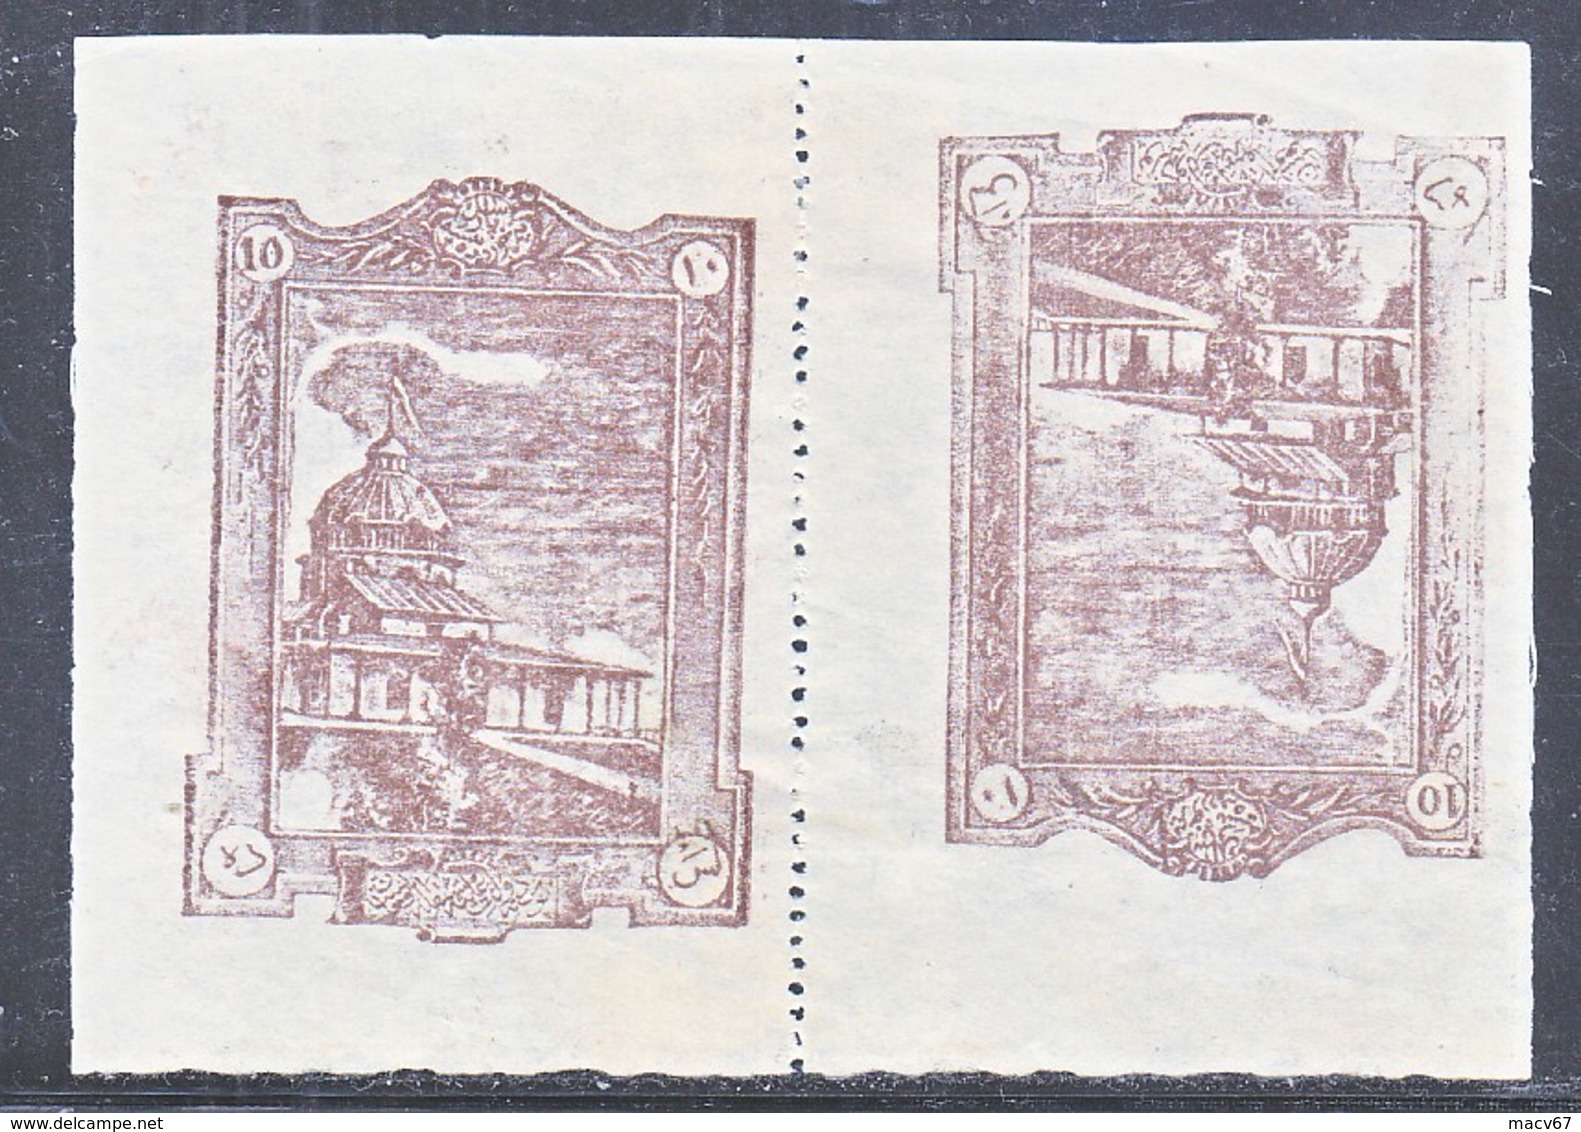 AFGHANISTAN  PARCEL  POST  Q 10 A   *  TETE  BECHE  PAIR - Afghanistan